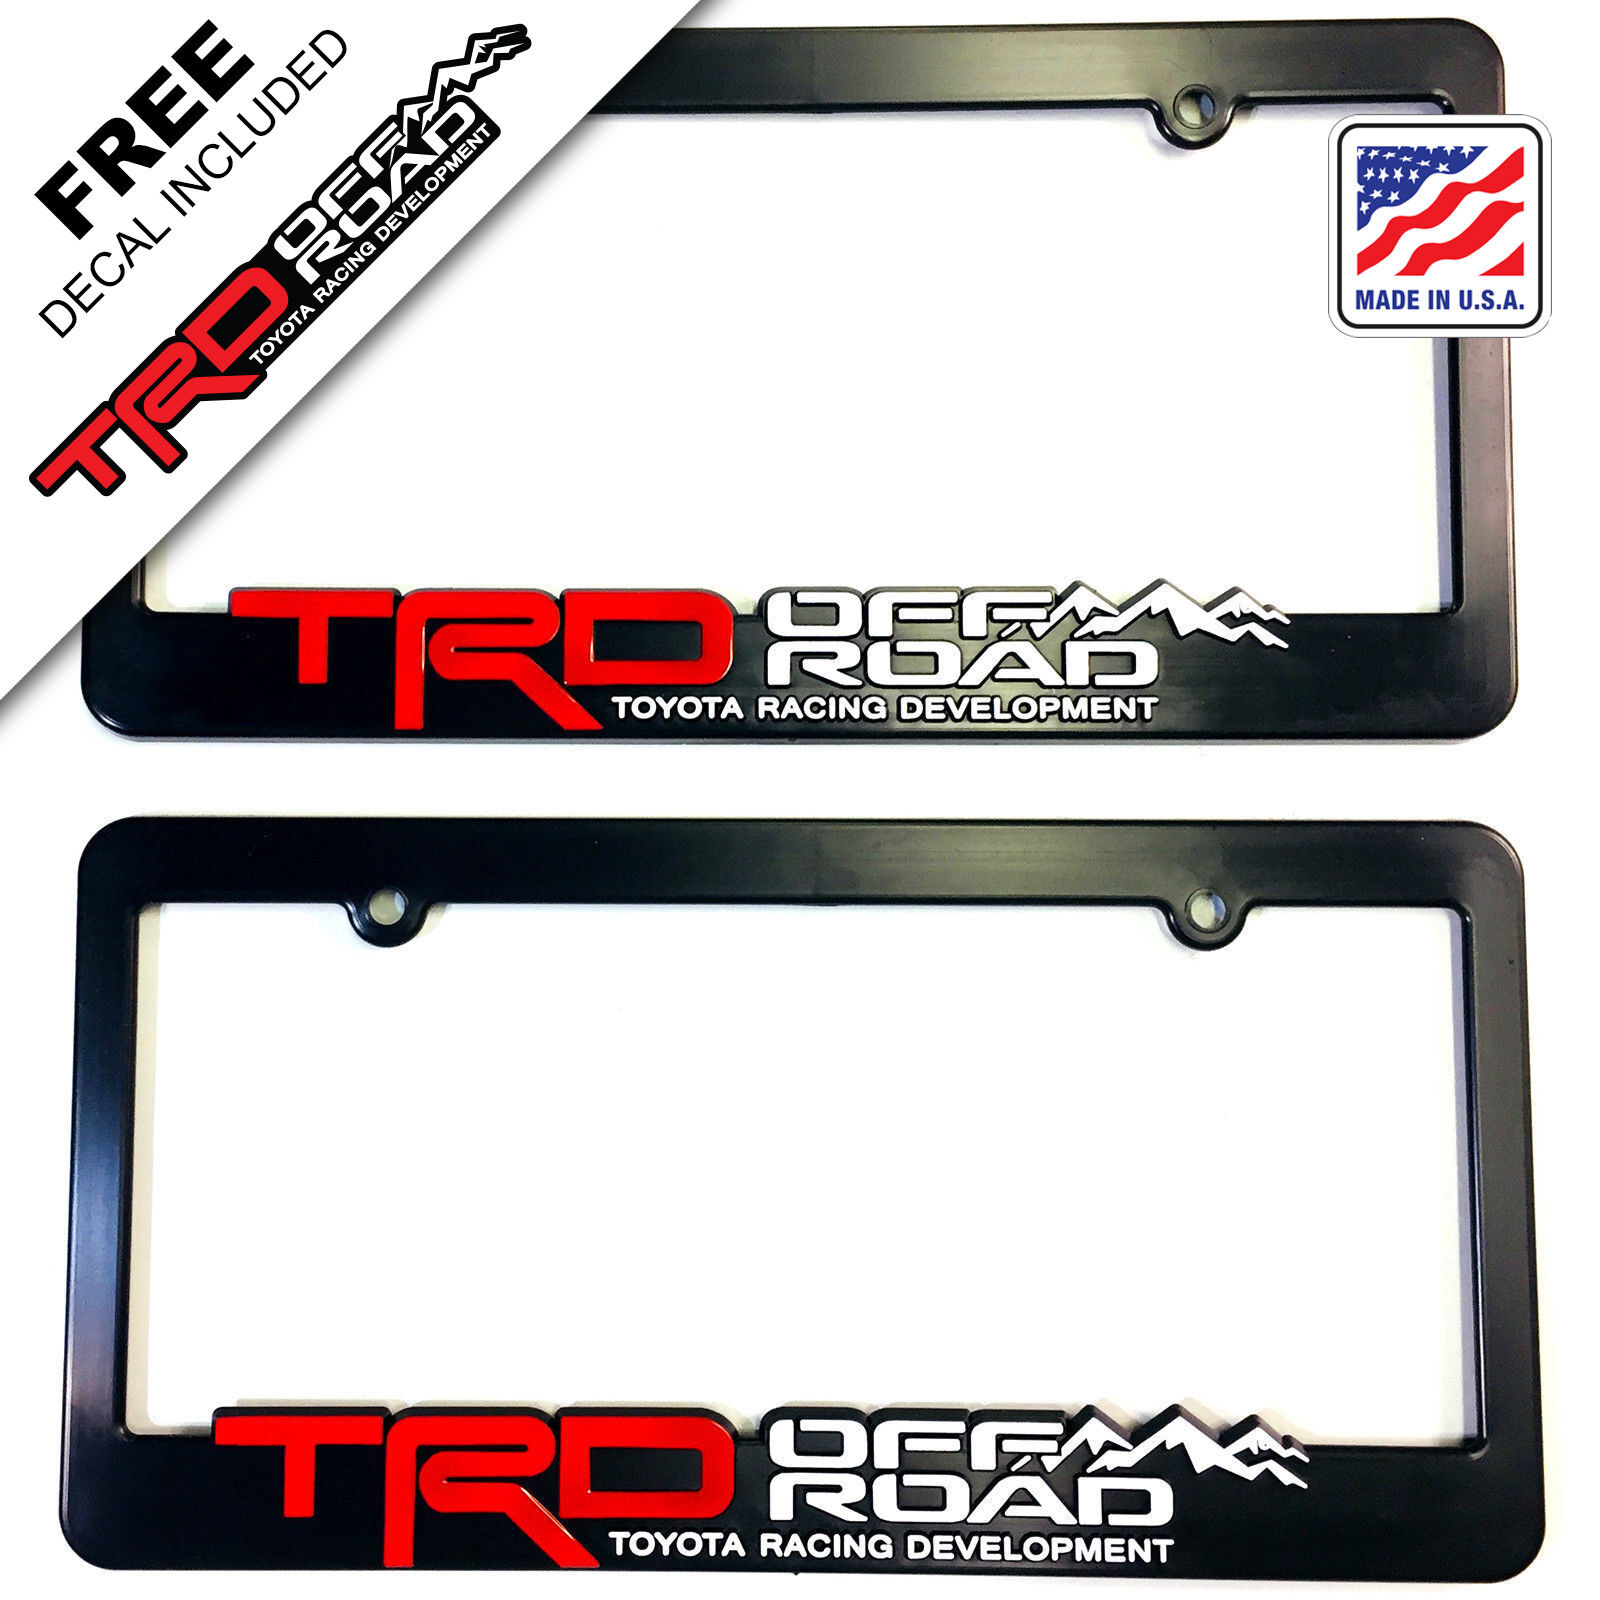 TRD-License-Plate-Frame-Toyota-TRD-Offroad-Tacoma-FJ-Cruiser-4x4-off-road-Rally